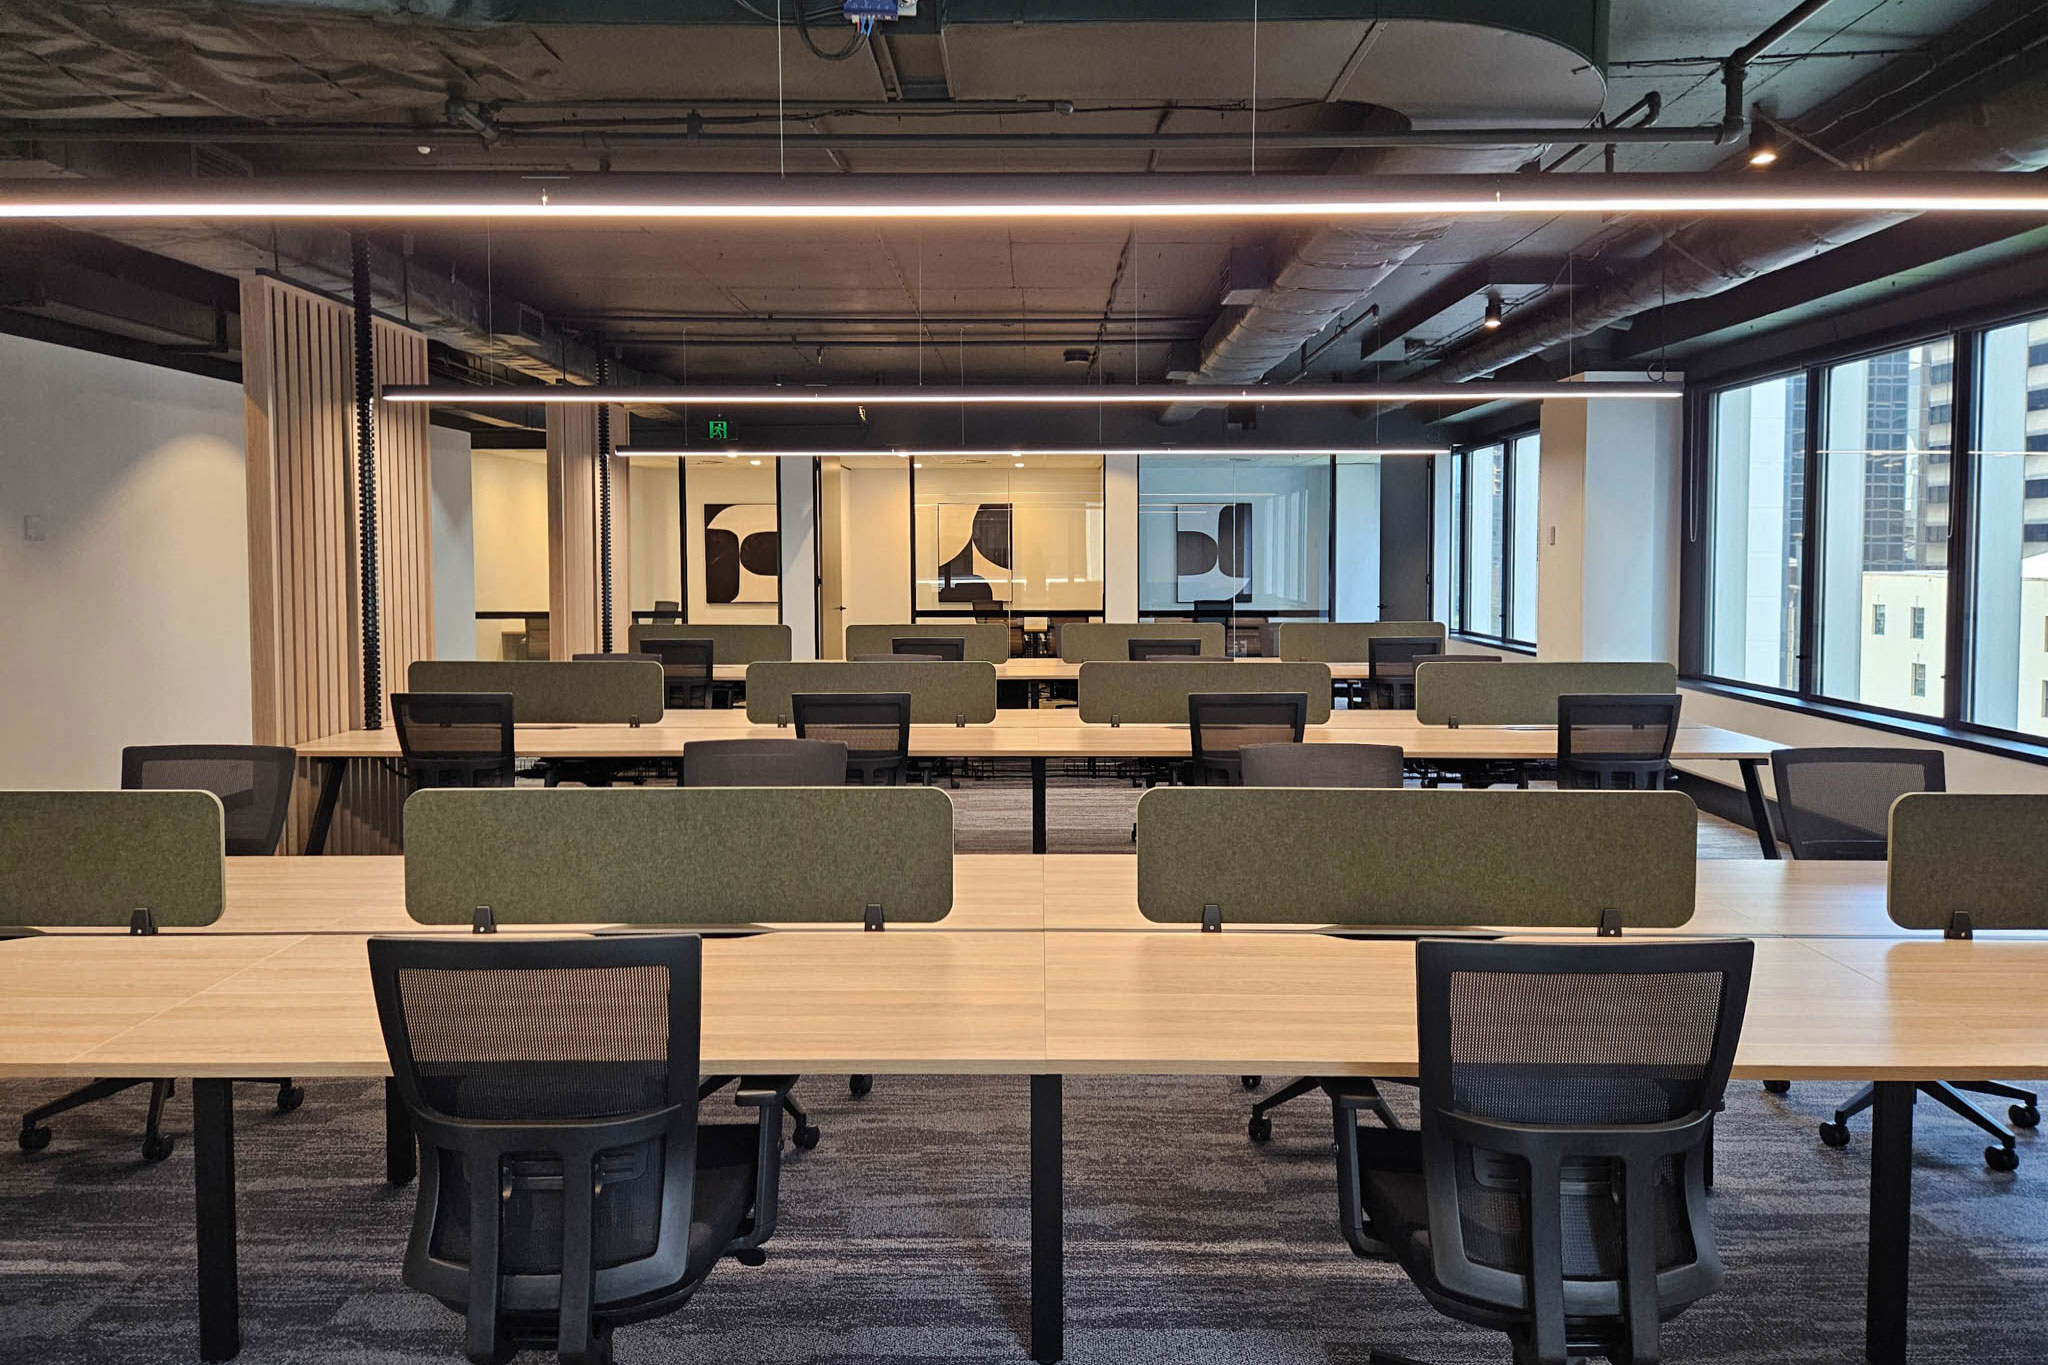 Office interior with workstations, chairs, acoustic screens, and private offices in background